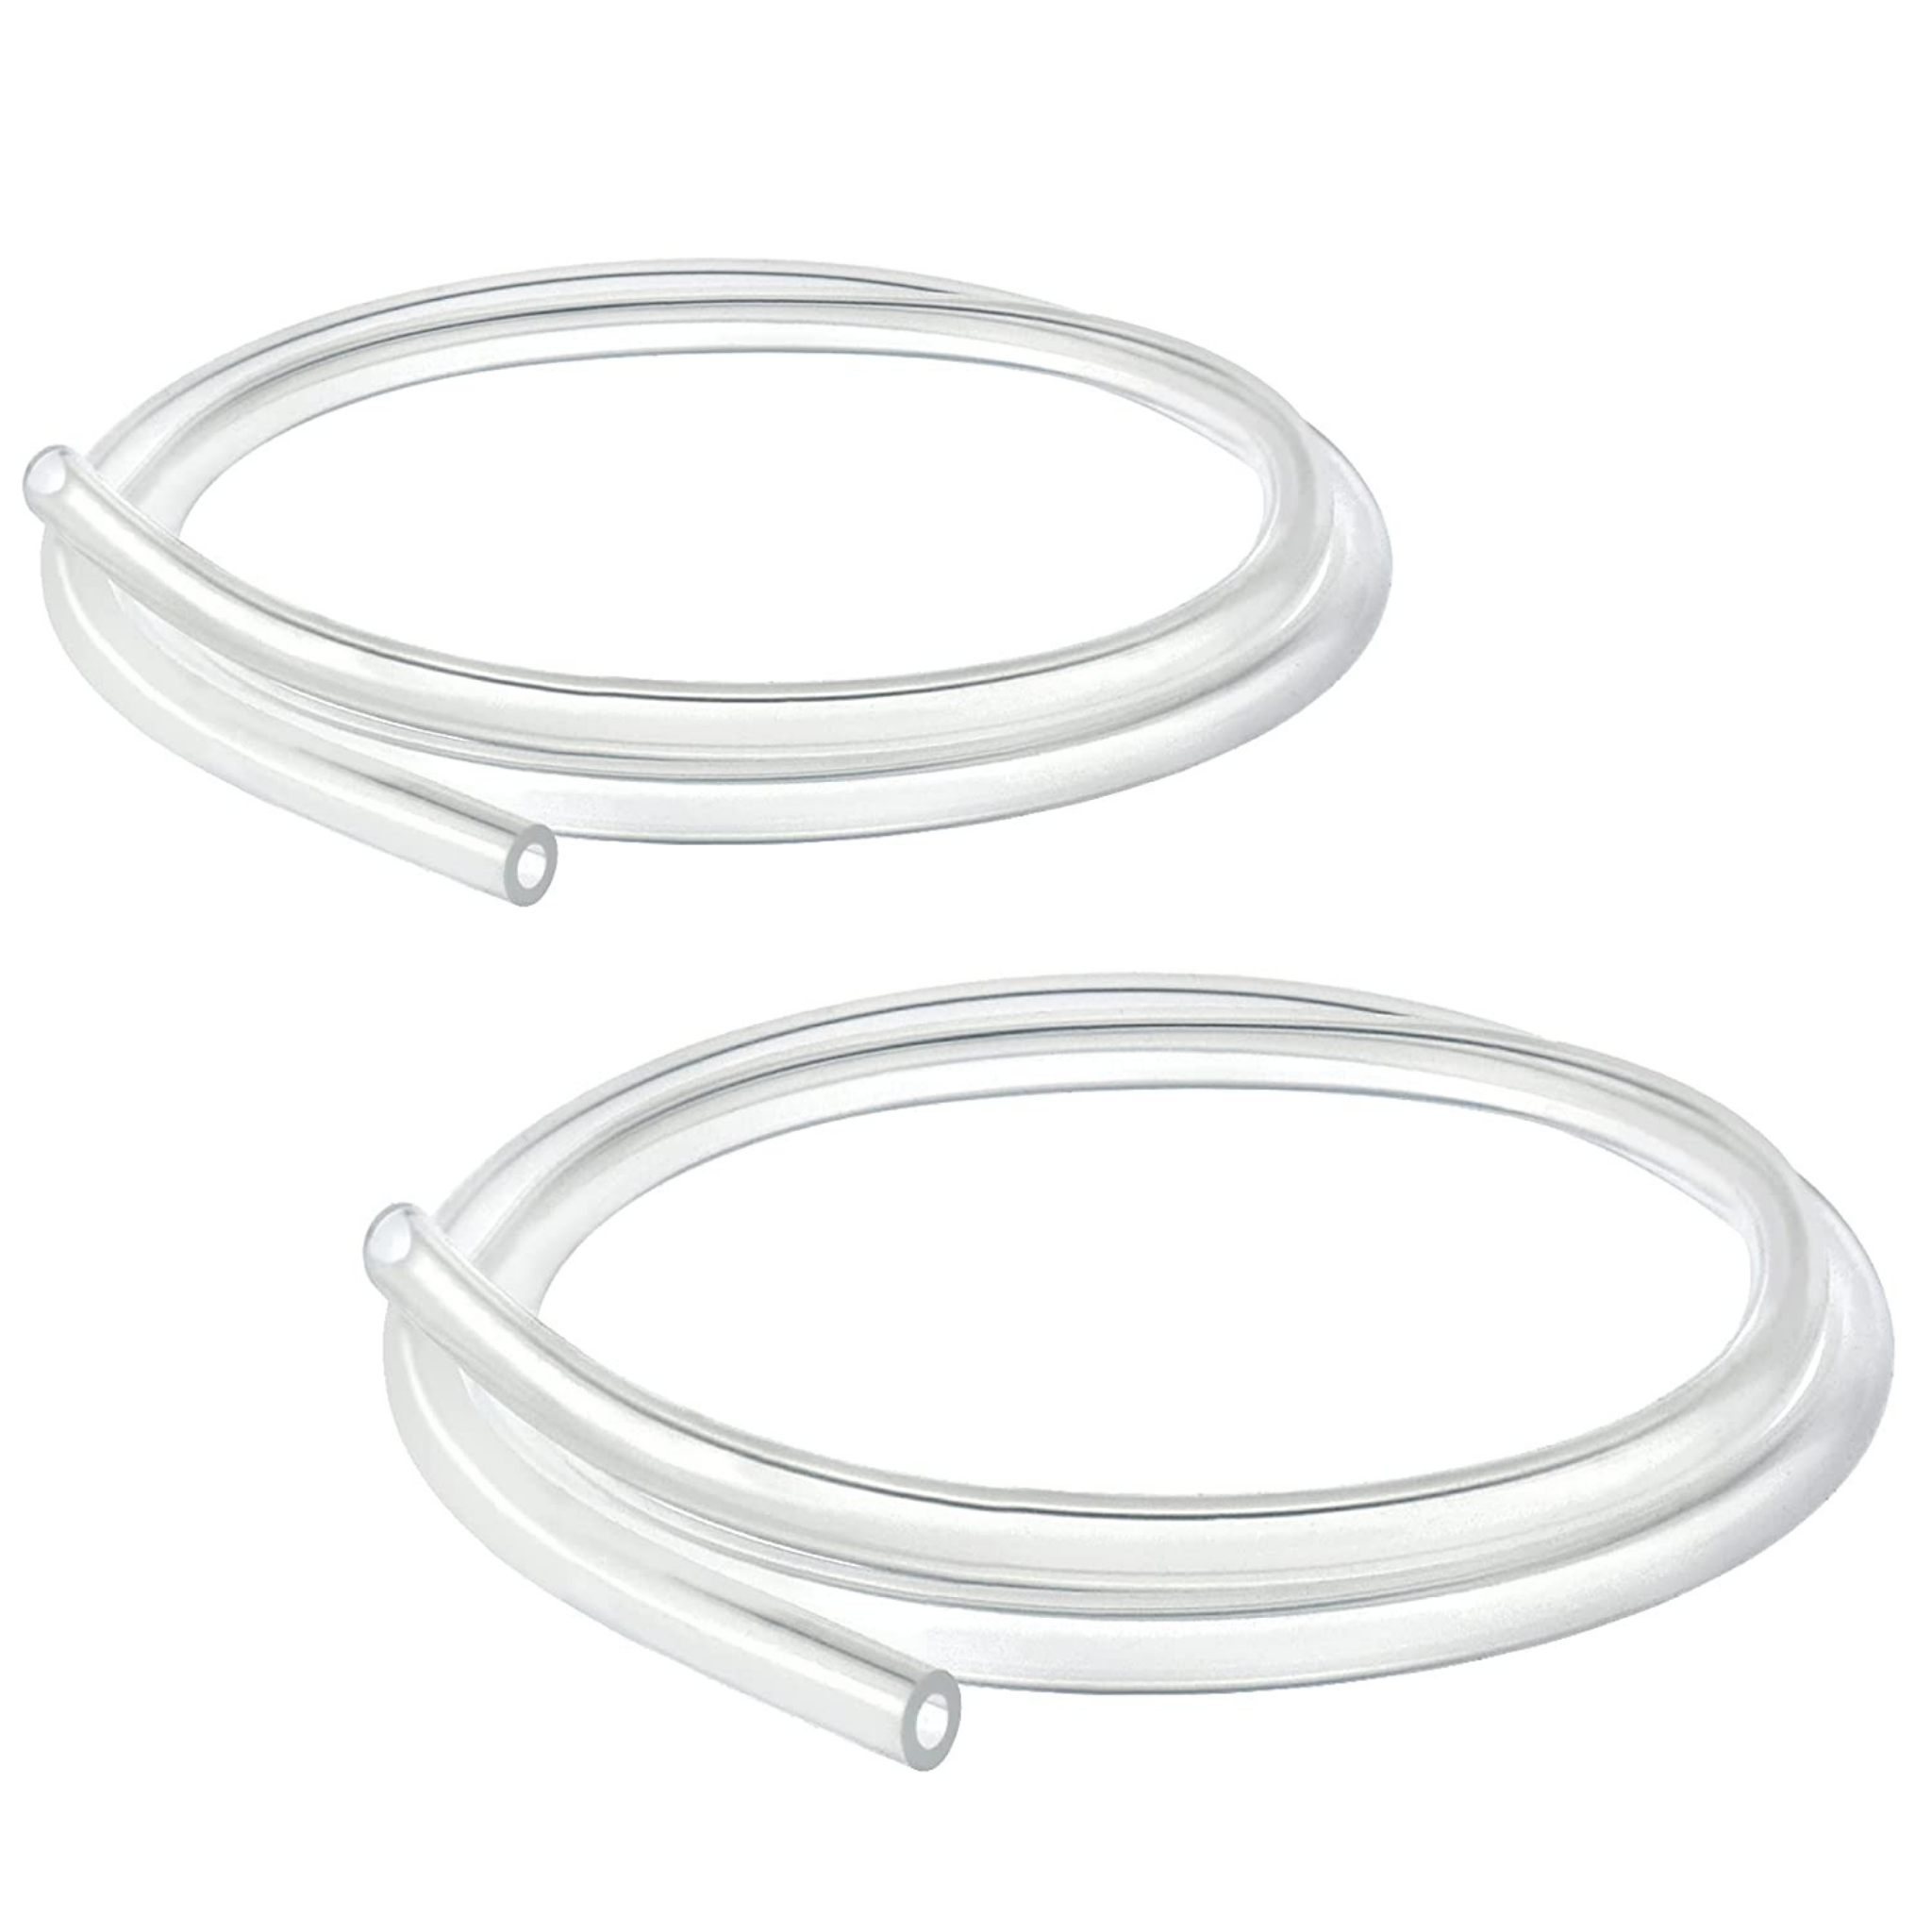 Spectra Tubing - Feed Well Co.